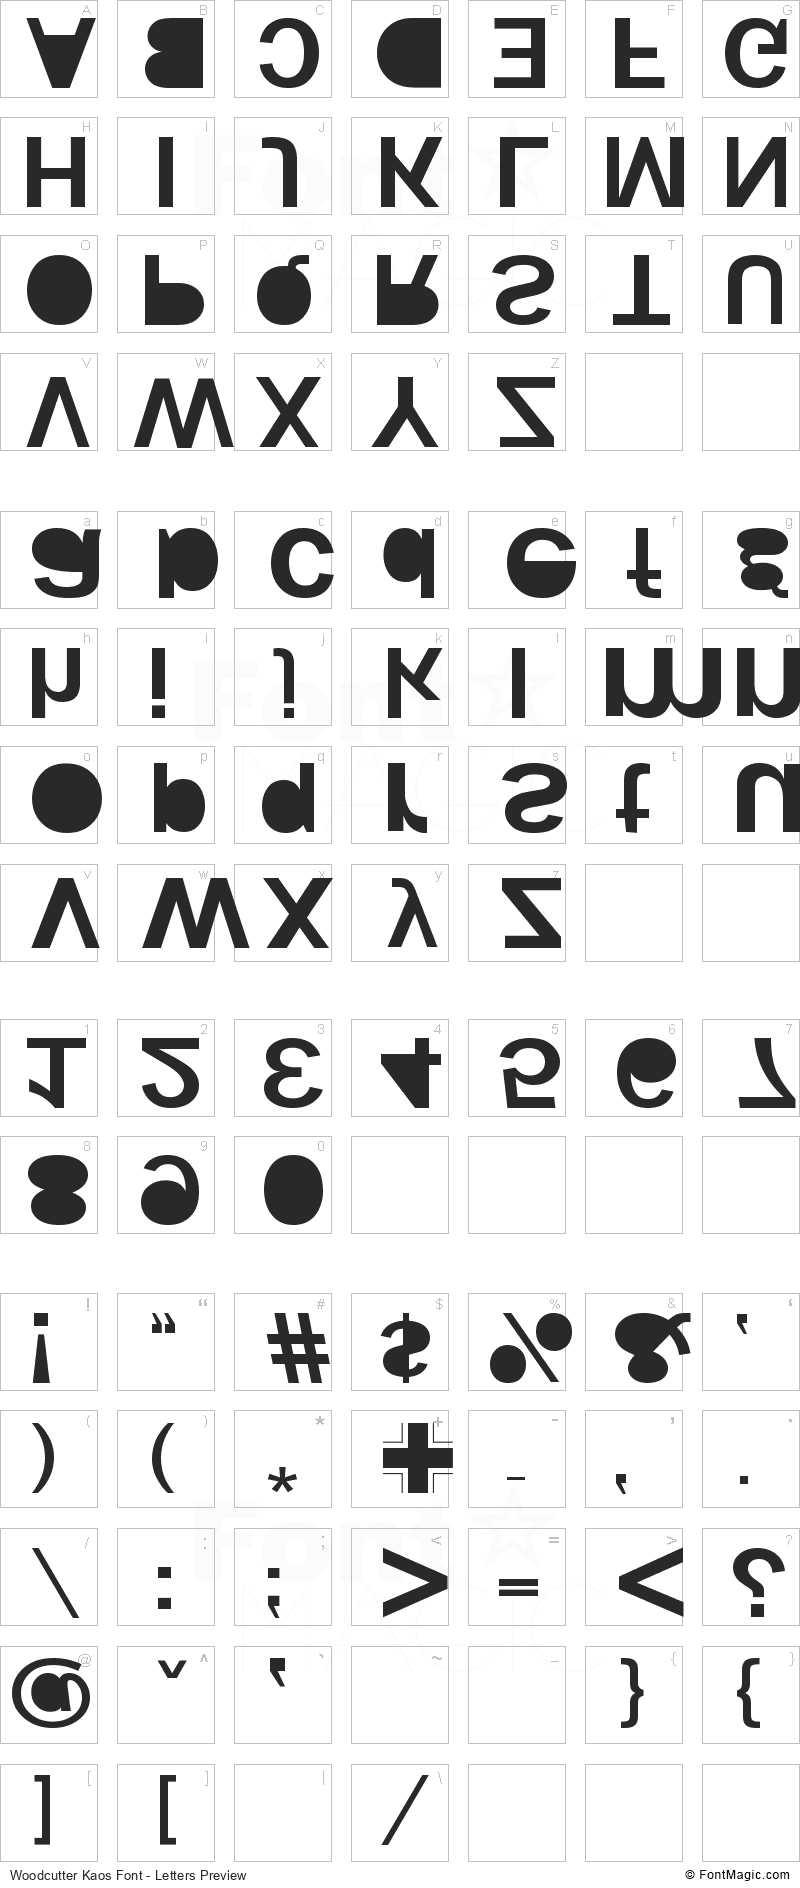 Woodcutter Kaos Font - All Latters Preview Chart